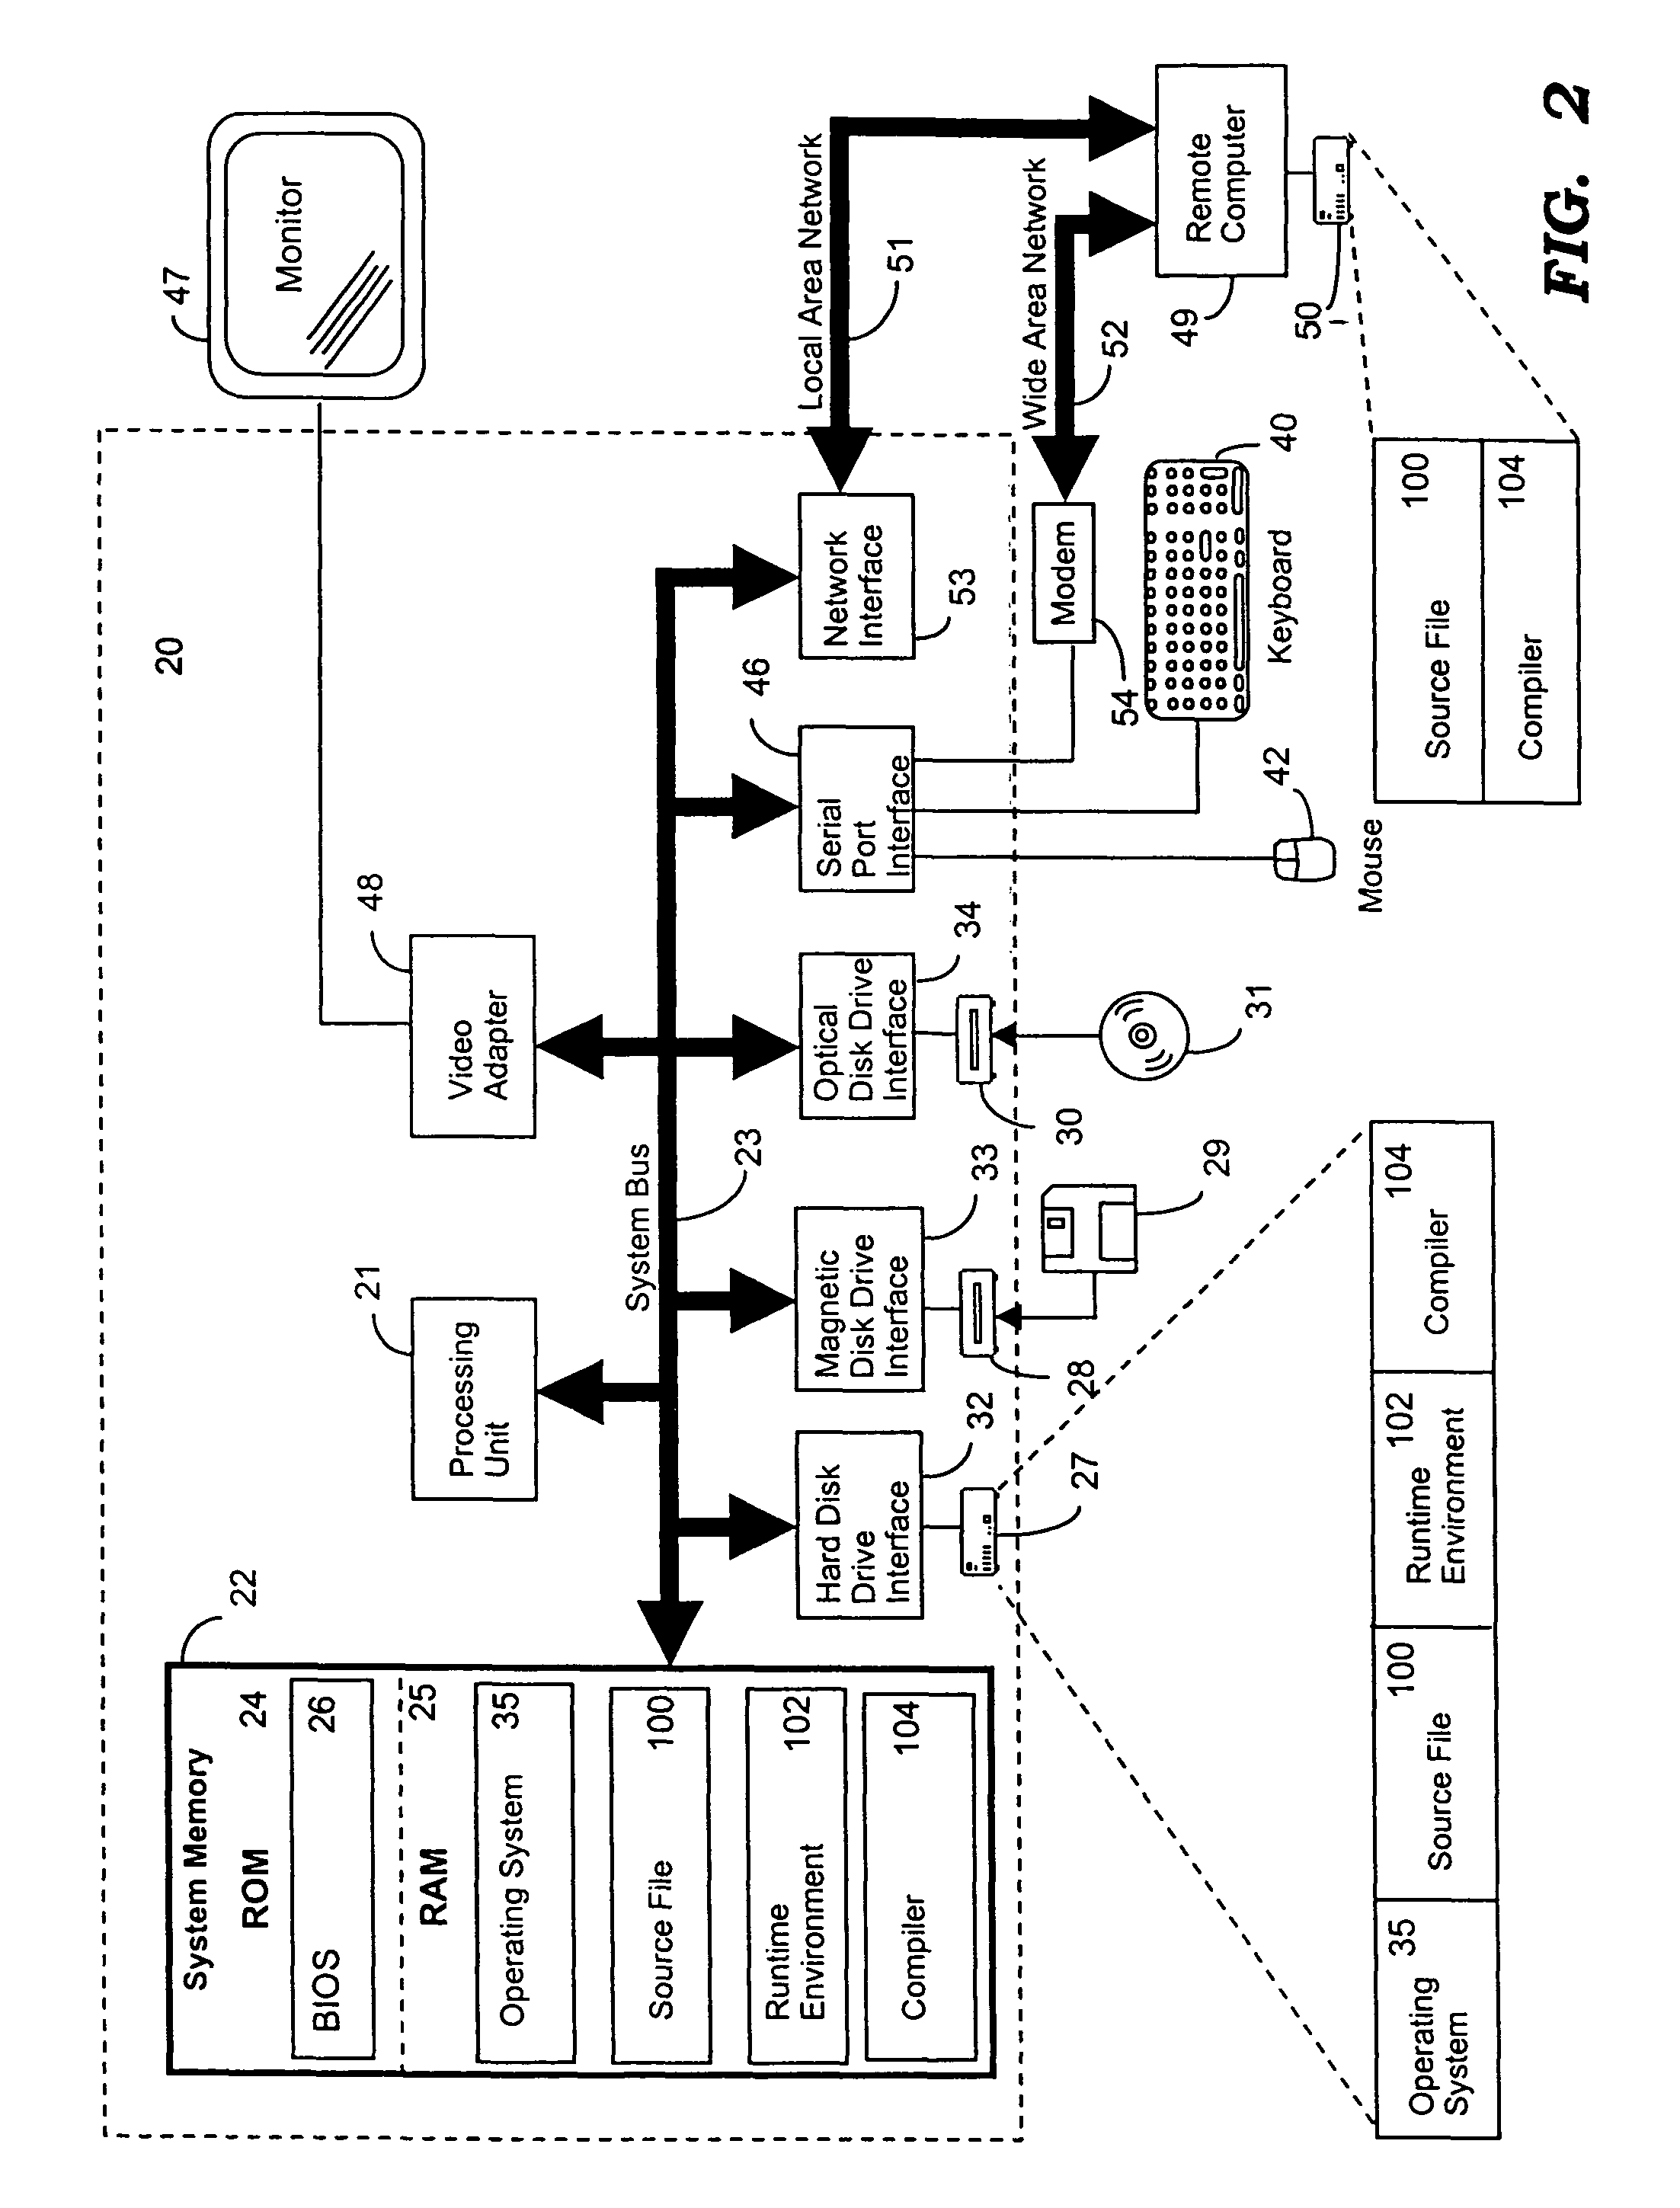 Unified data type system and method